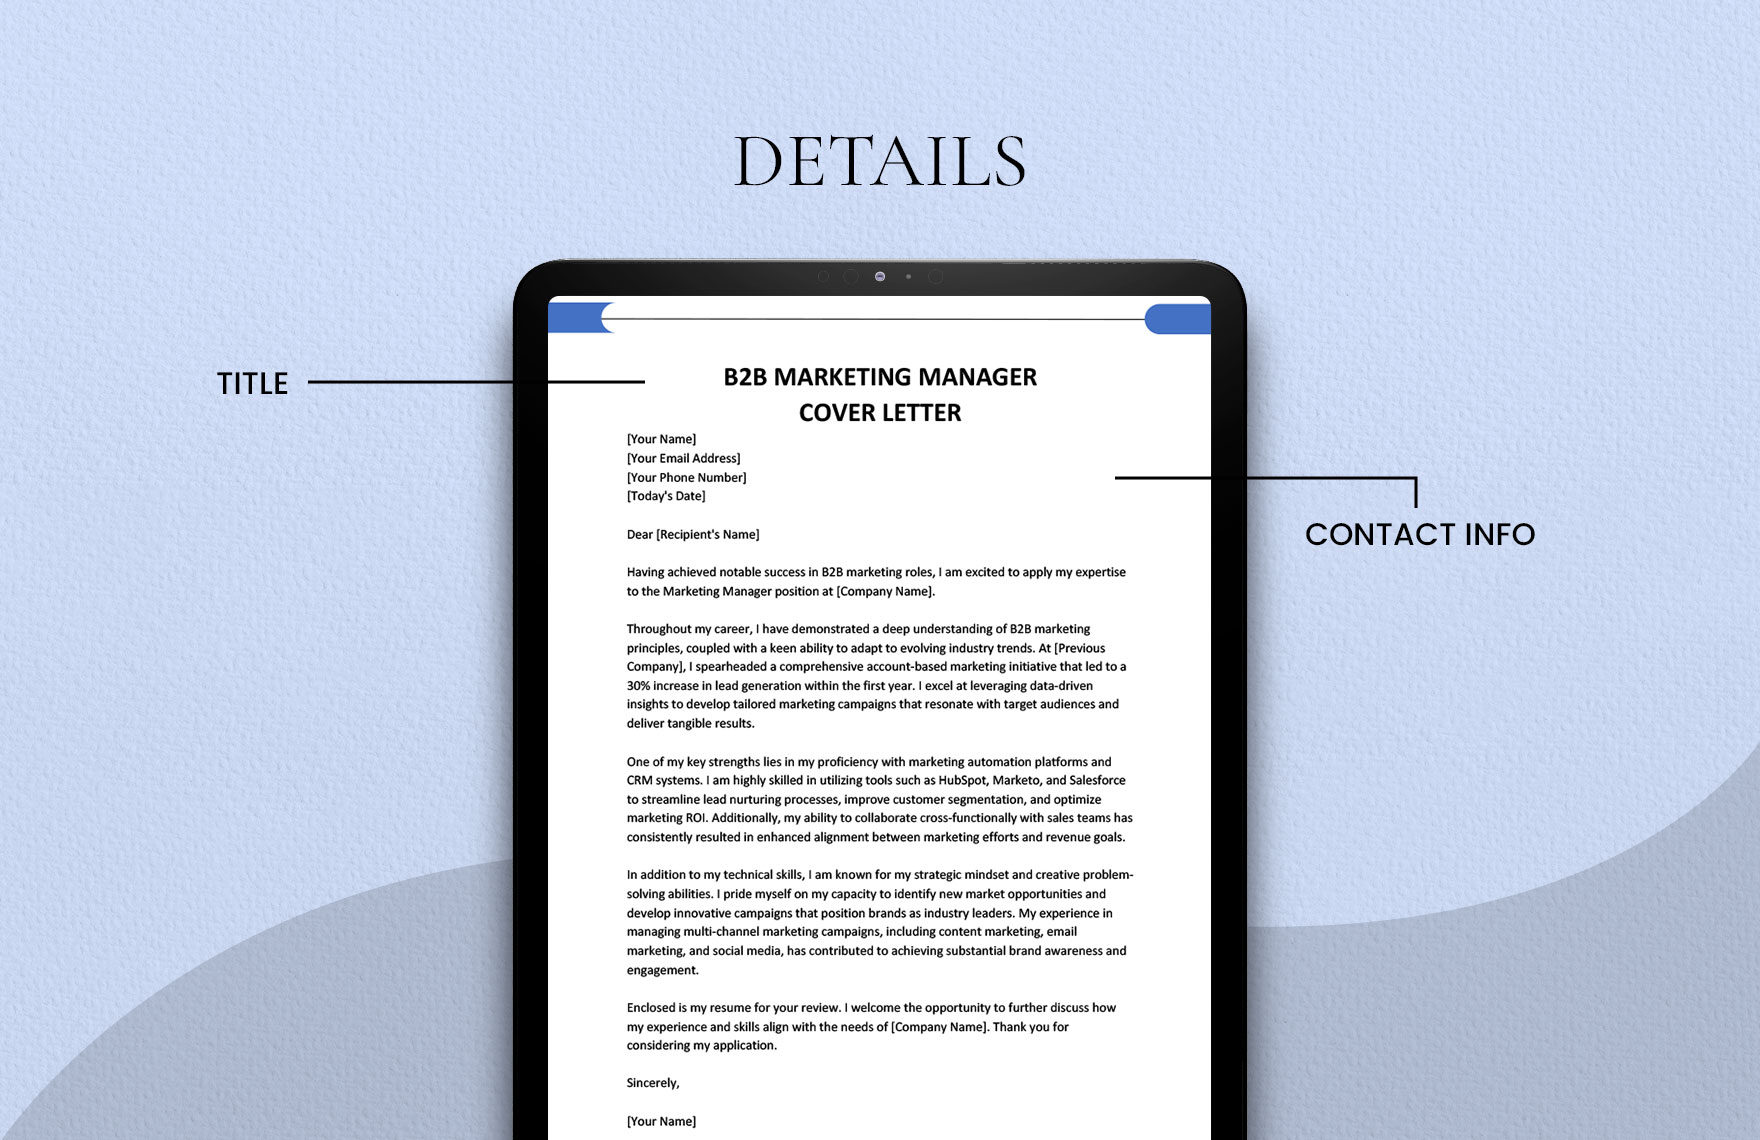 B2B Marketing Manager Cover Letter